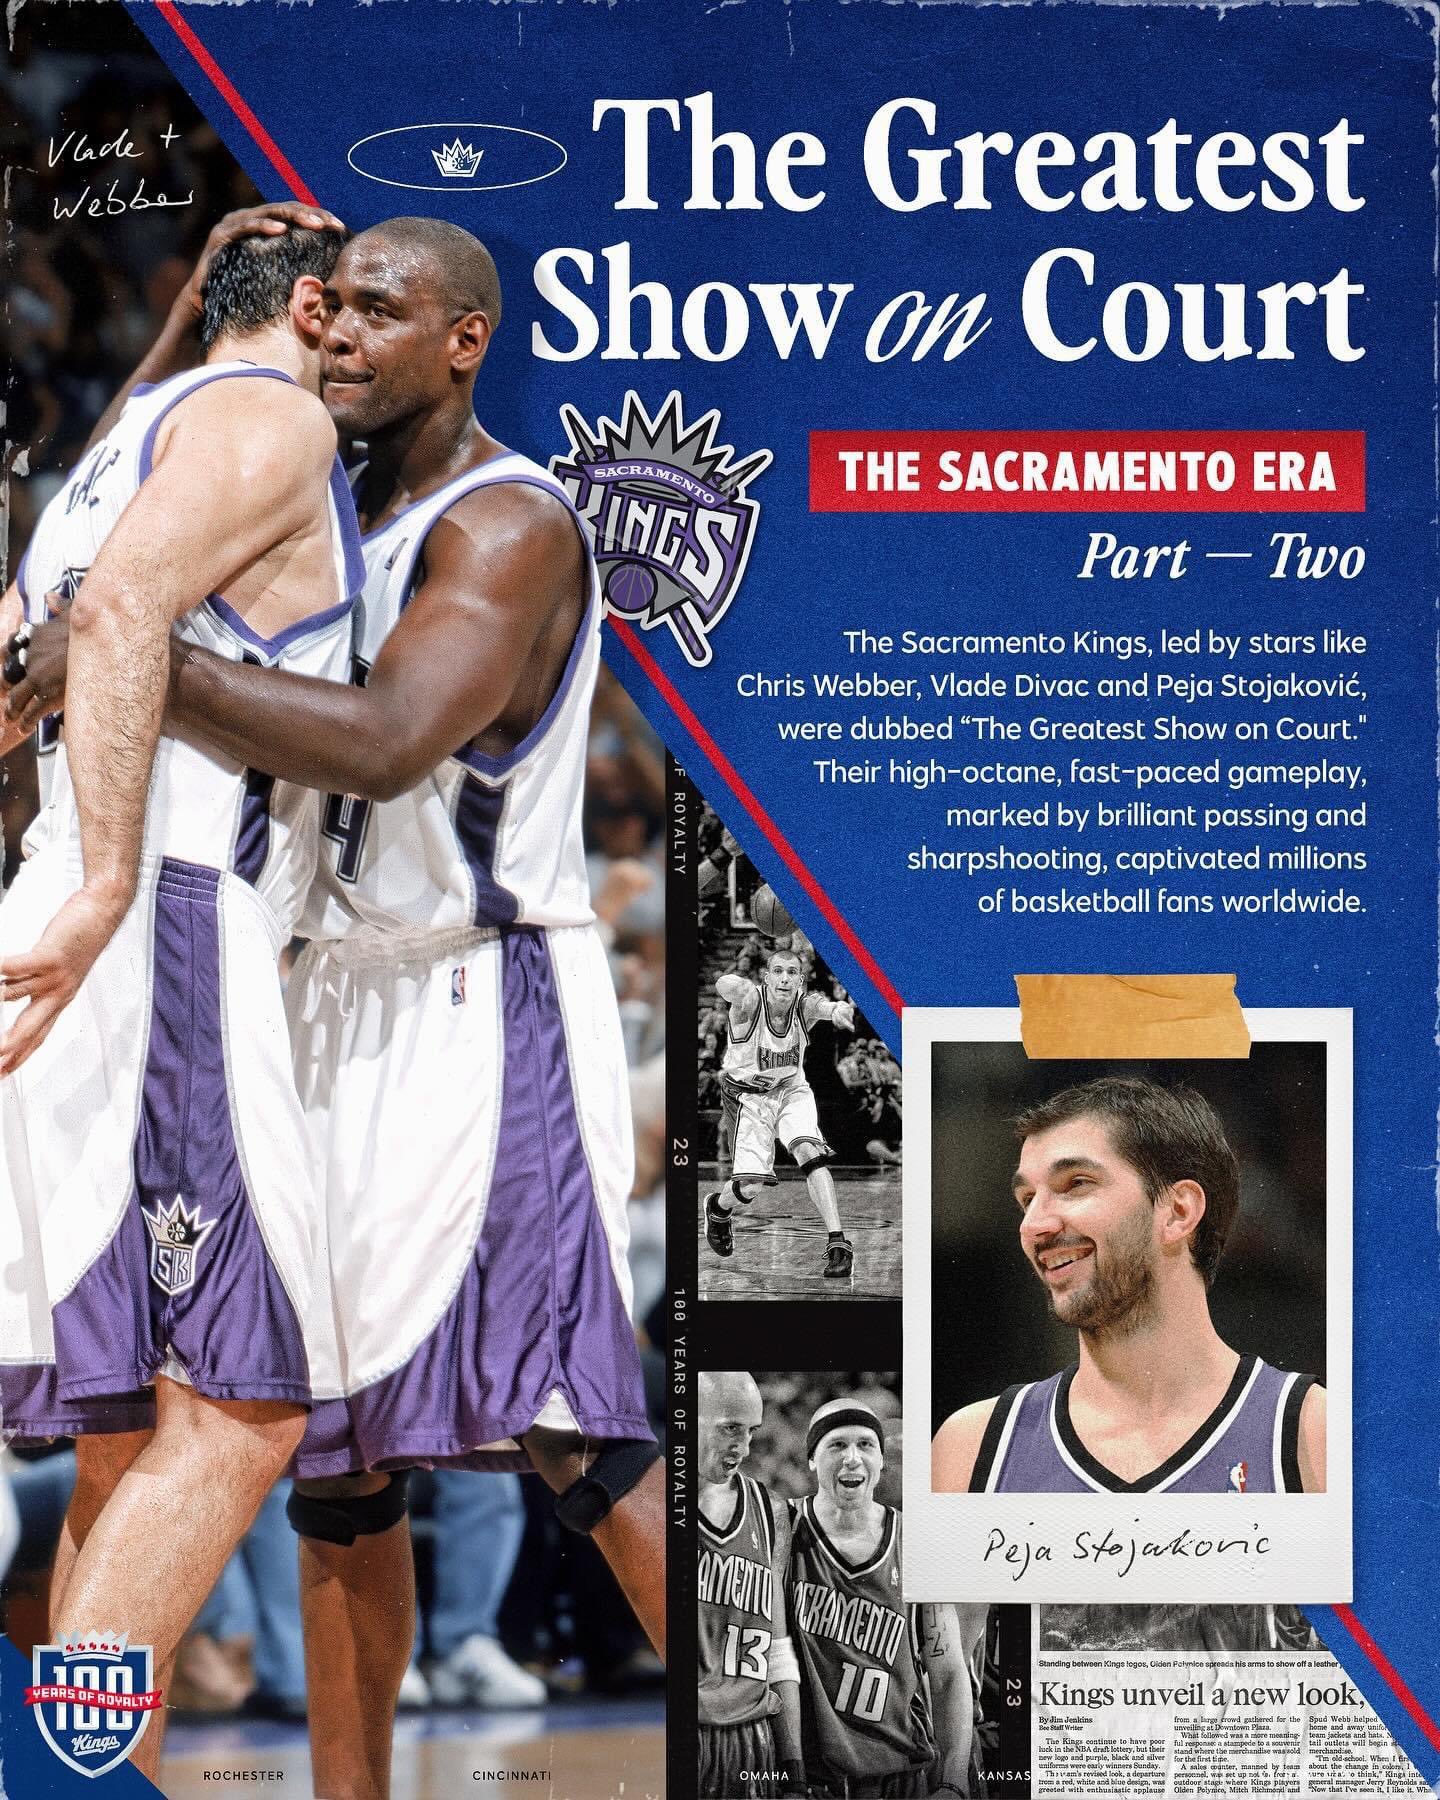 Sacramento Kings - 𝑯𝒆𝒍𝒍𝒐, 𝑫𝒆𝒄𝒆𝒎𝒃𝒆𝒓 ✨ Every day this month  check our Instagram Story to uncover new surpris